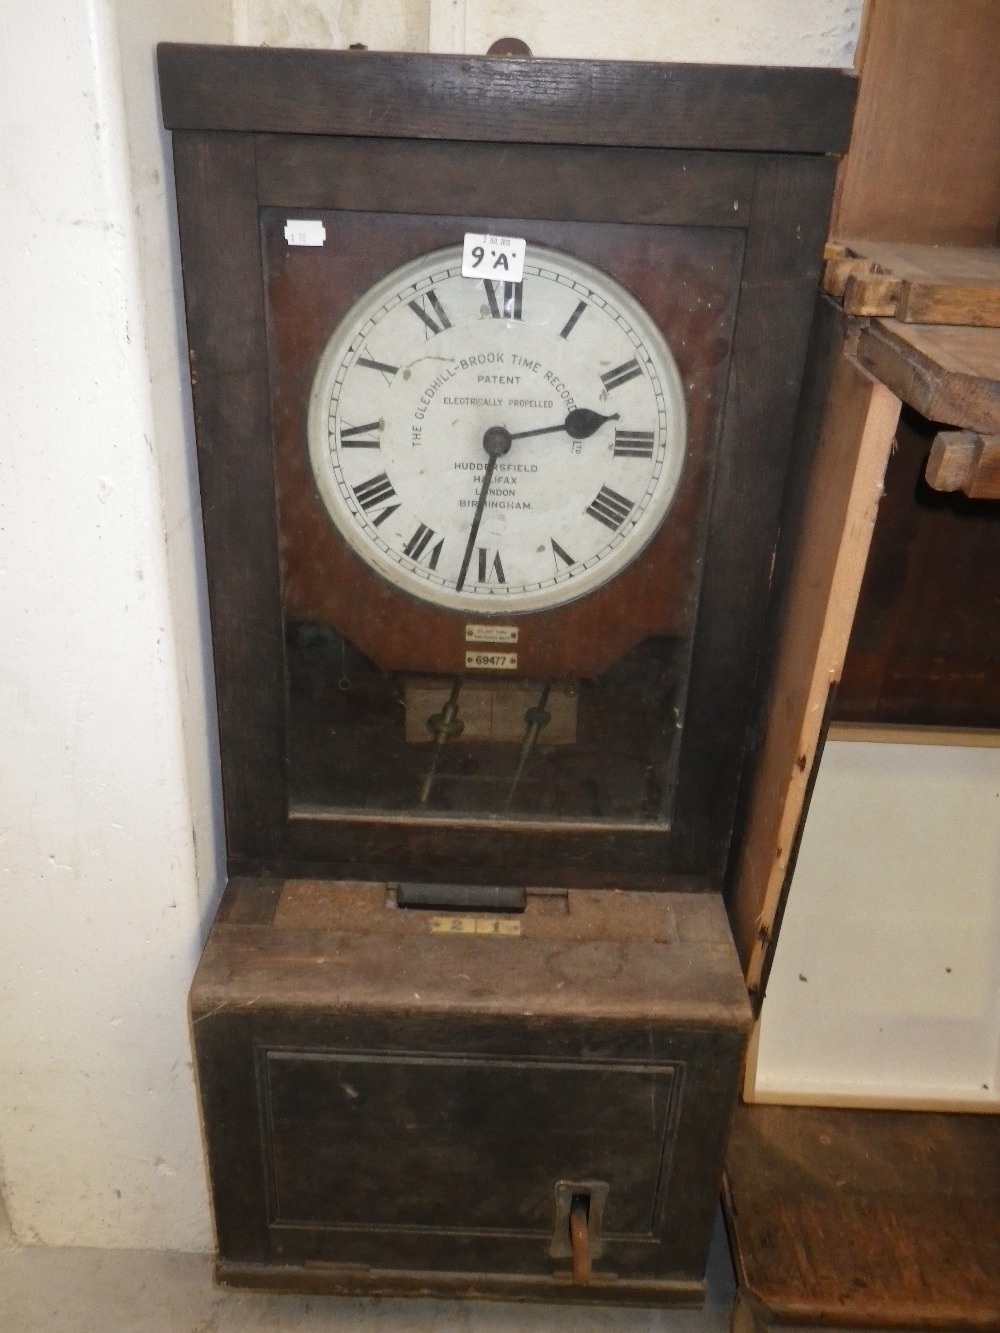 An oak-cased `Electrically Propelled Glendhill-Brook Time Recorder` (clocking-in clock)